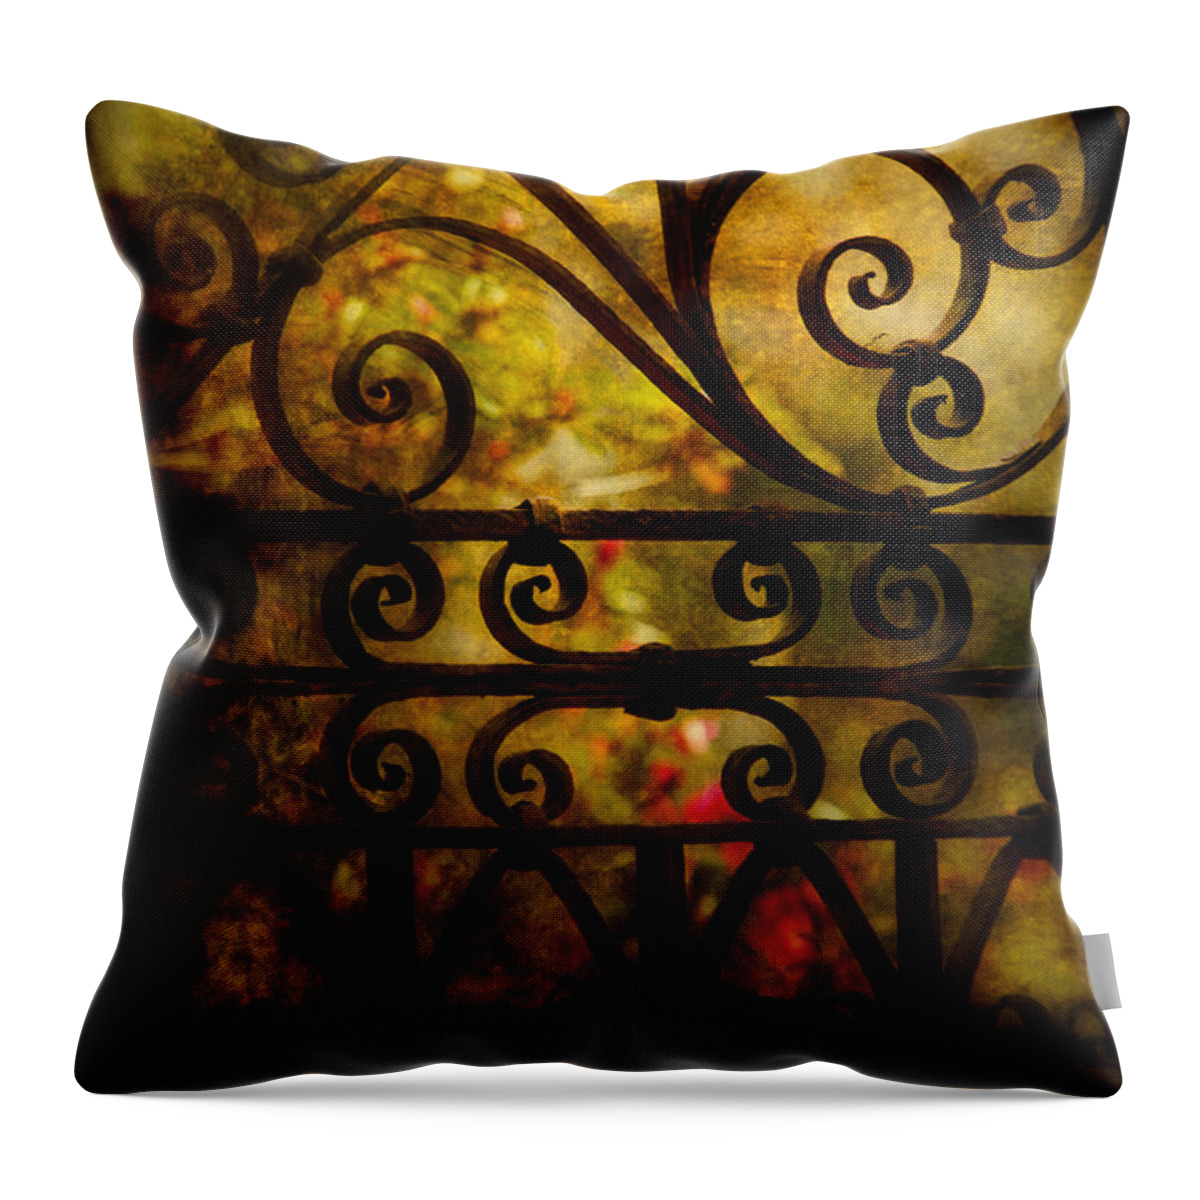 Gate Throw Pillow featuring the photograph Open Iron Gate by Susanne Van Hulst